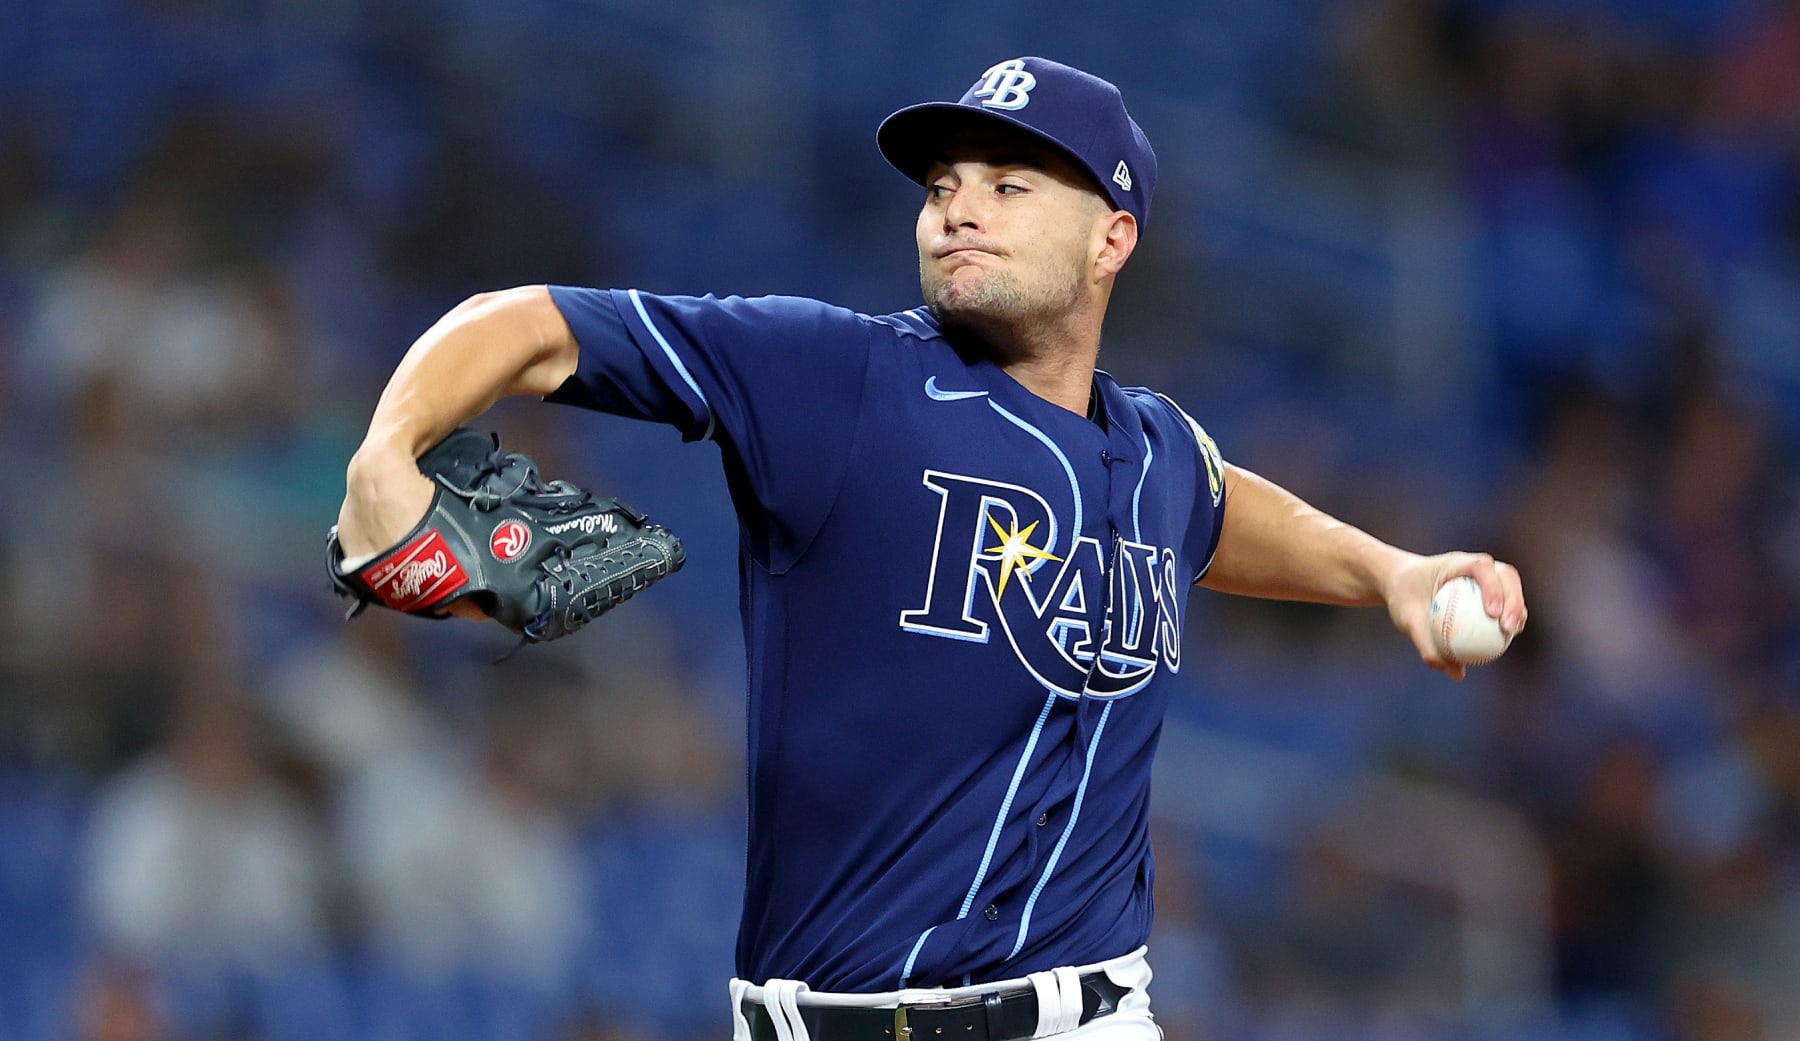 Rays report: Corey Kluber on mound for road trip finale